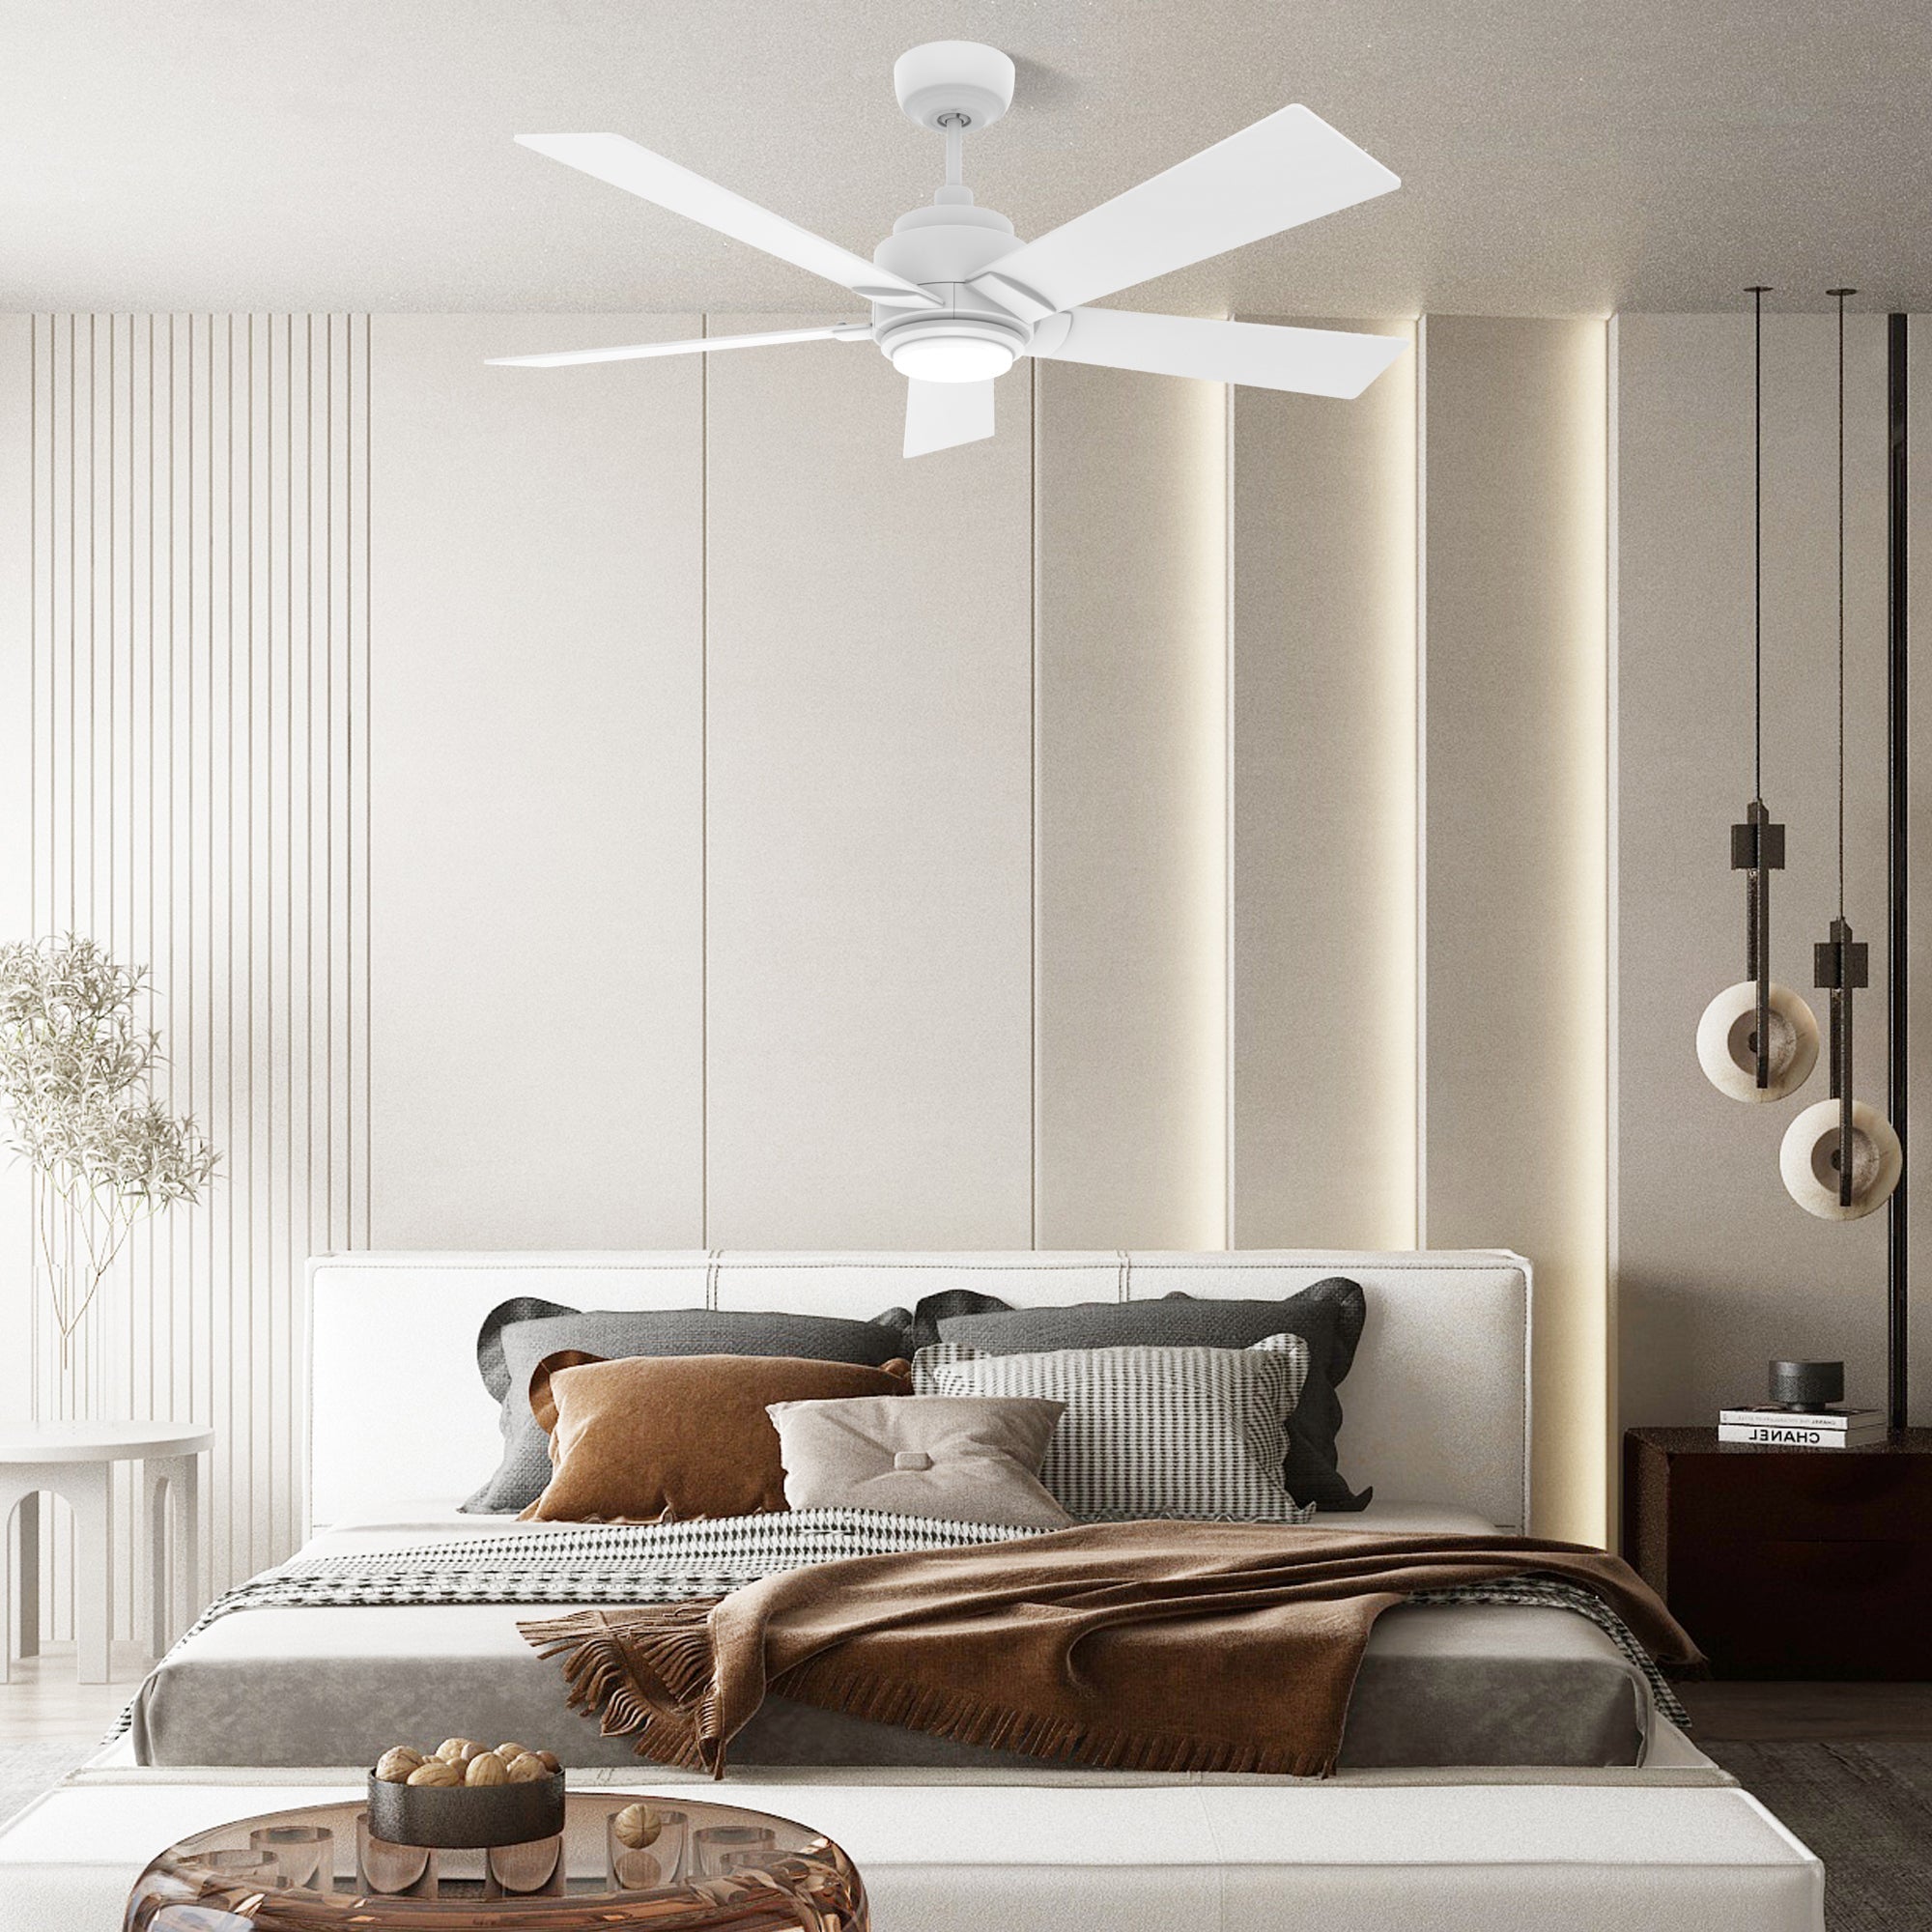 This Aspen 48'' smart ceiling fan keeps your space cool, bright, and stylish. It is a soft modern masterpiece perfect for your large indoor living spaces. This Wifi smart ceiling fan is a simplicity designing with White finish, use elegant Plywood blades and has an integrated 4000K LED cool light. The fan features Remote control, Wi-Fi apps, Siri Shortcut and Voice control technology (compatible with Amazon Alexa and Google Home Assistant ) to set fan preferences. #color_white